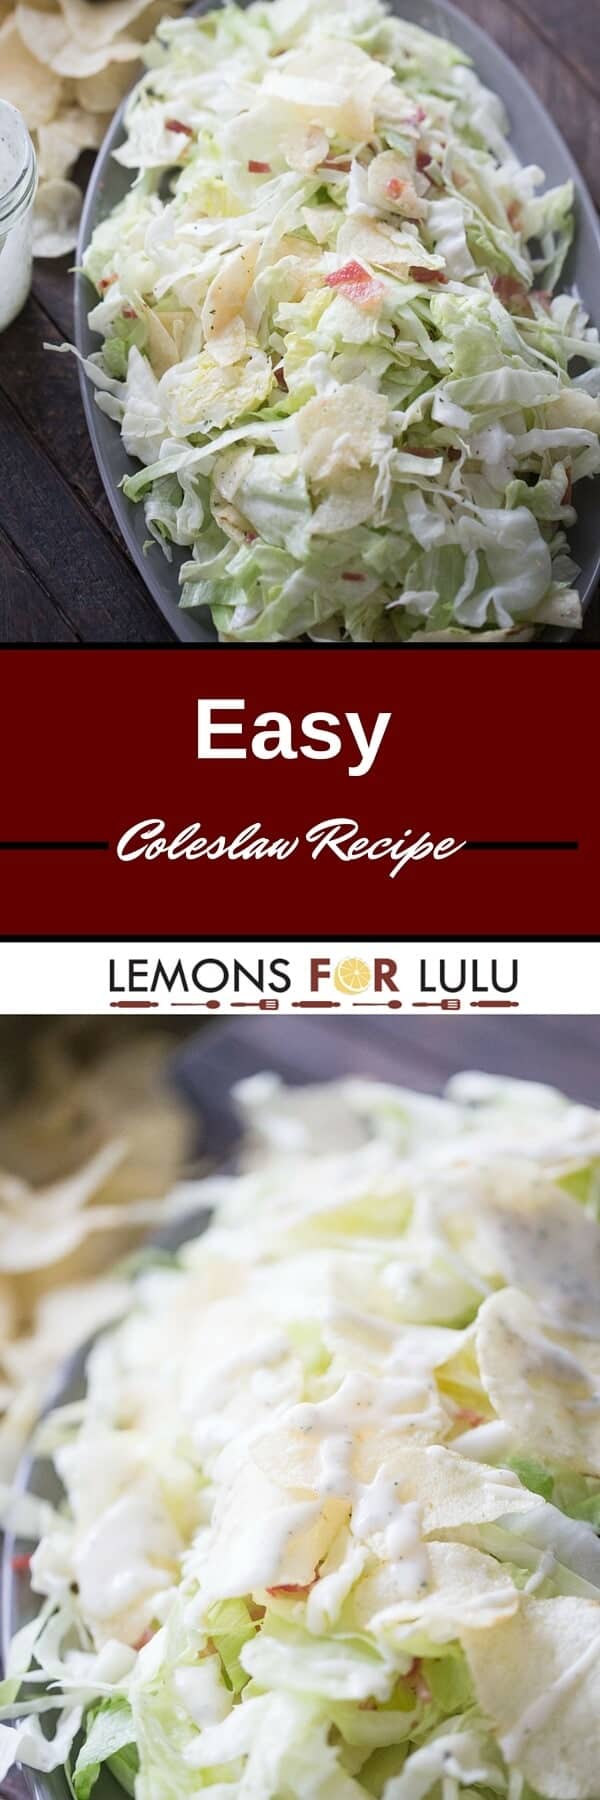 You will not believe the flavor in this easy coleslaw recipe! Lettuce, bacon, potato chips are tossed with a simple ranch dressing for an utterly unique and delicious side dish!